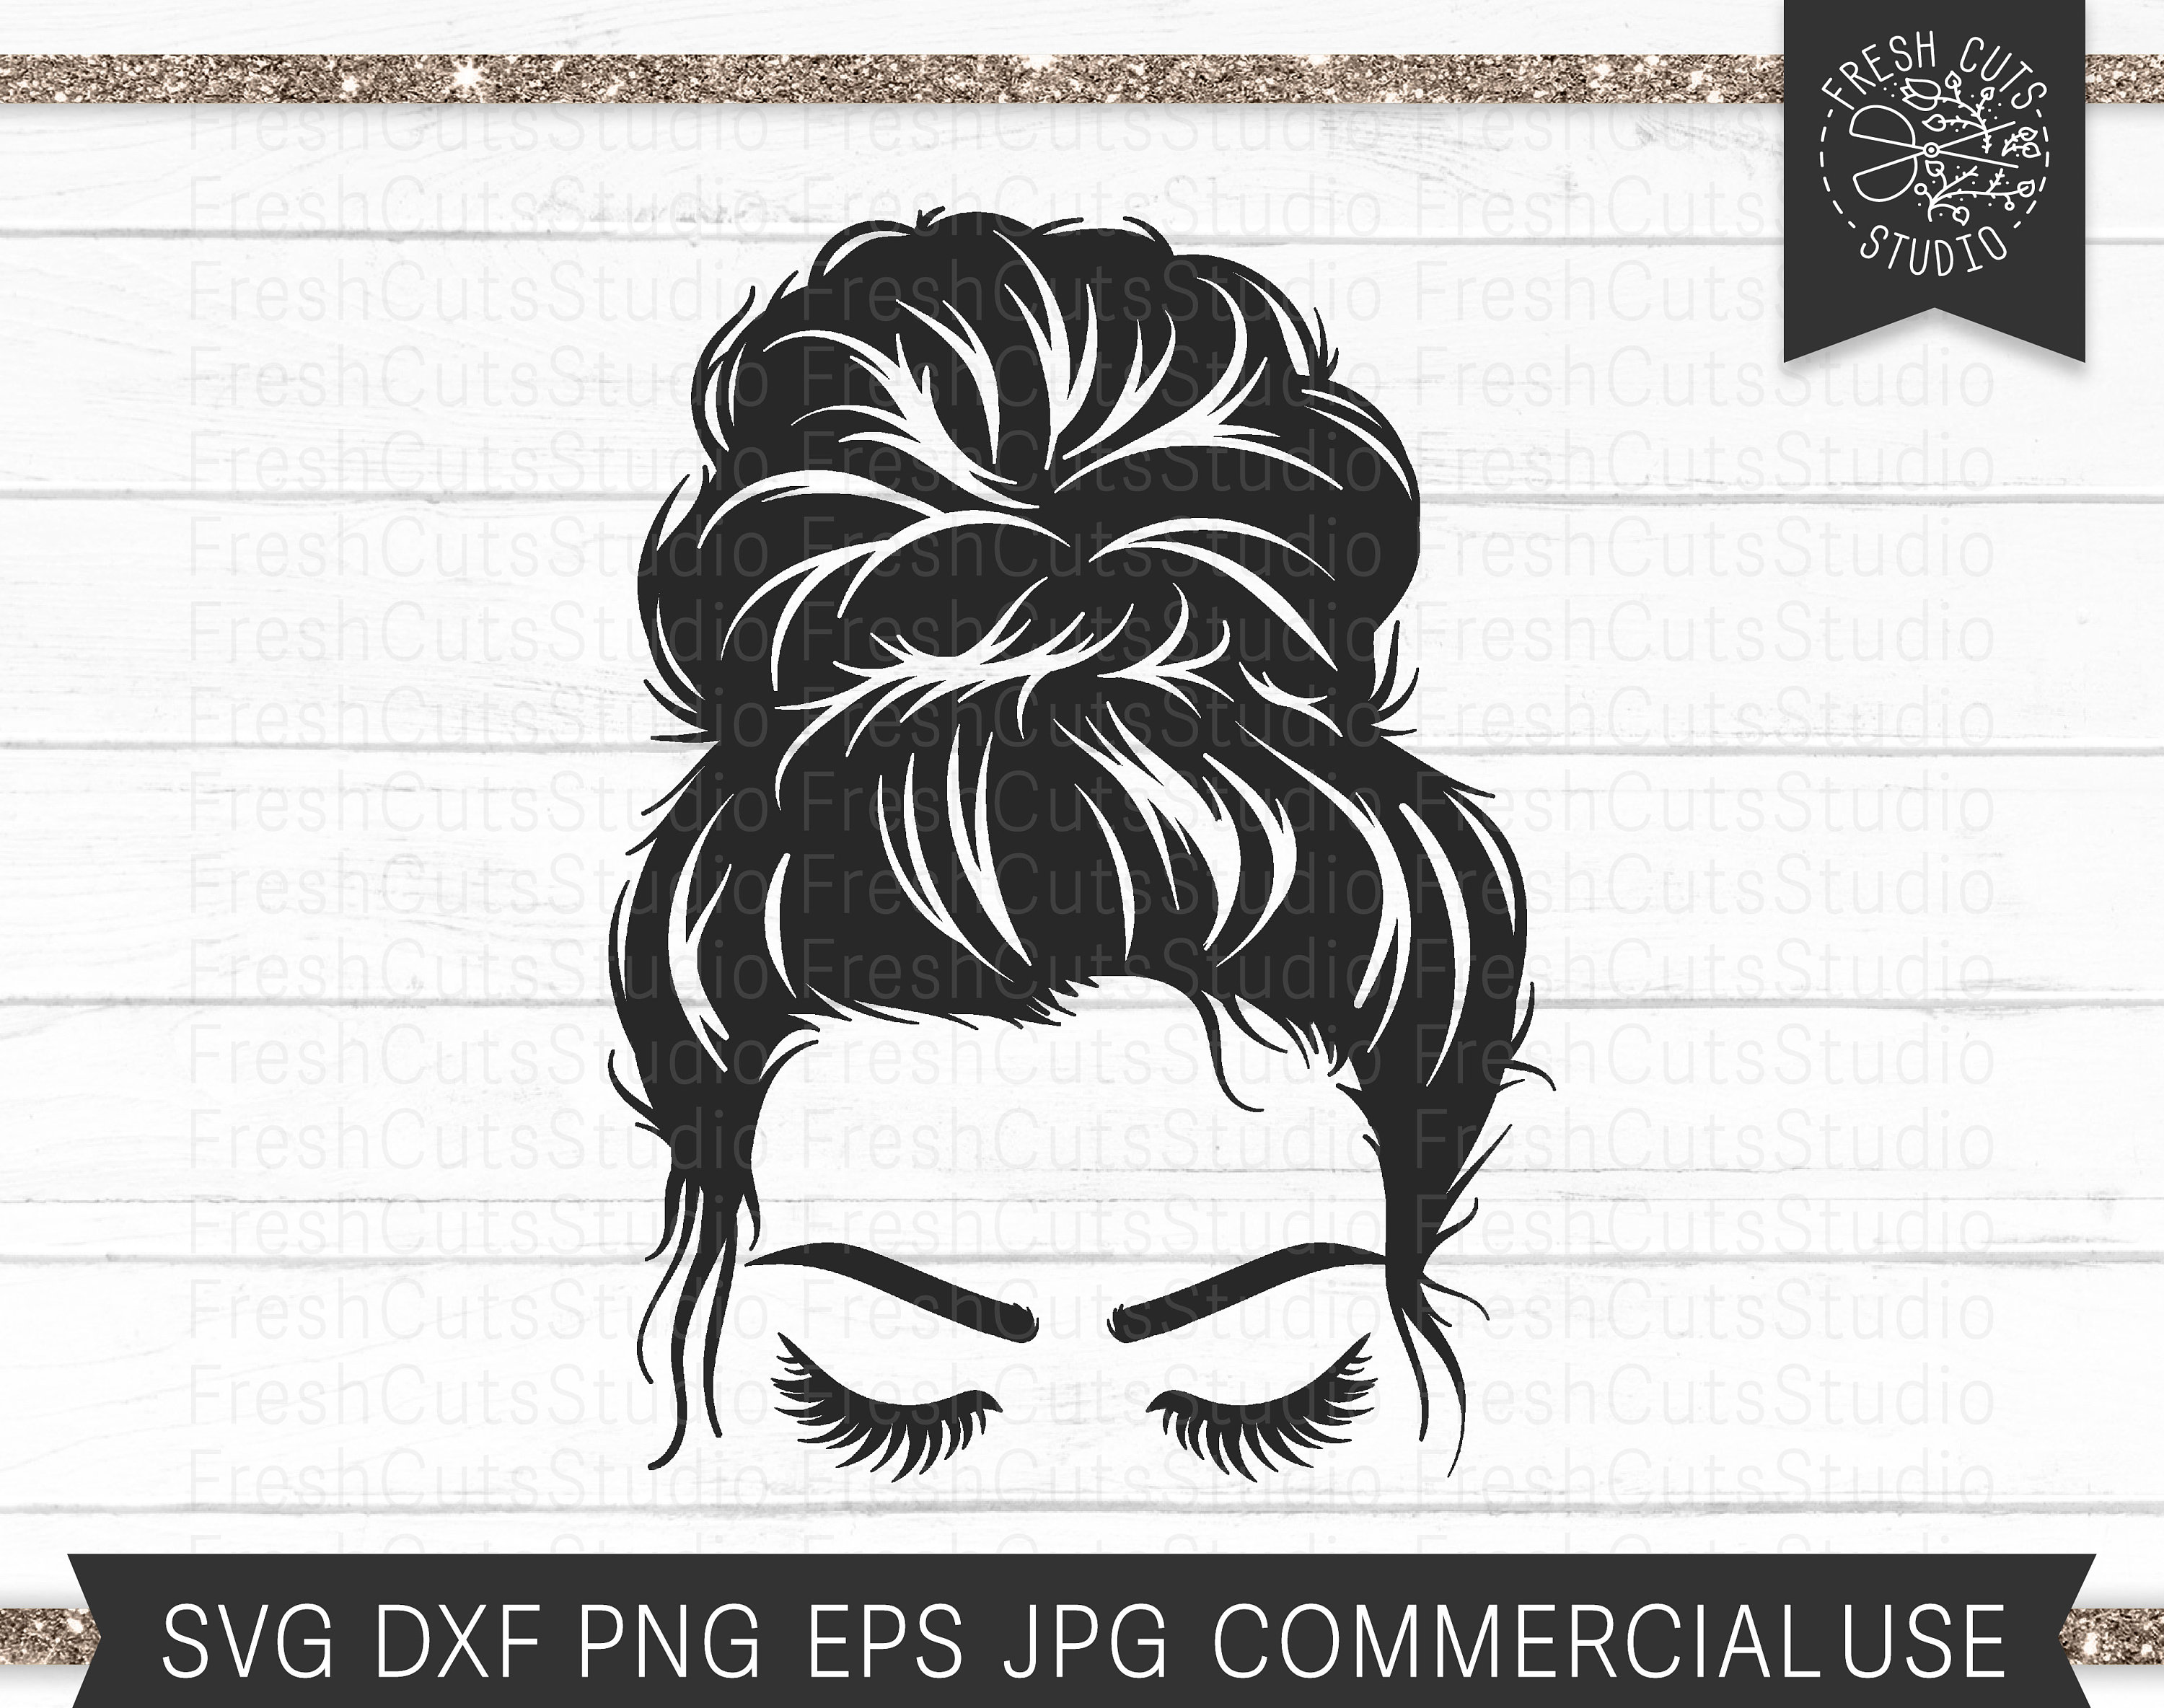 Top knot svg dxf,ai,eps Head Hair Bun Silhouettes 60 % OFF Face Girl with lashes Svg Instant Download png Messy Bun svg Mom life